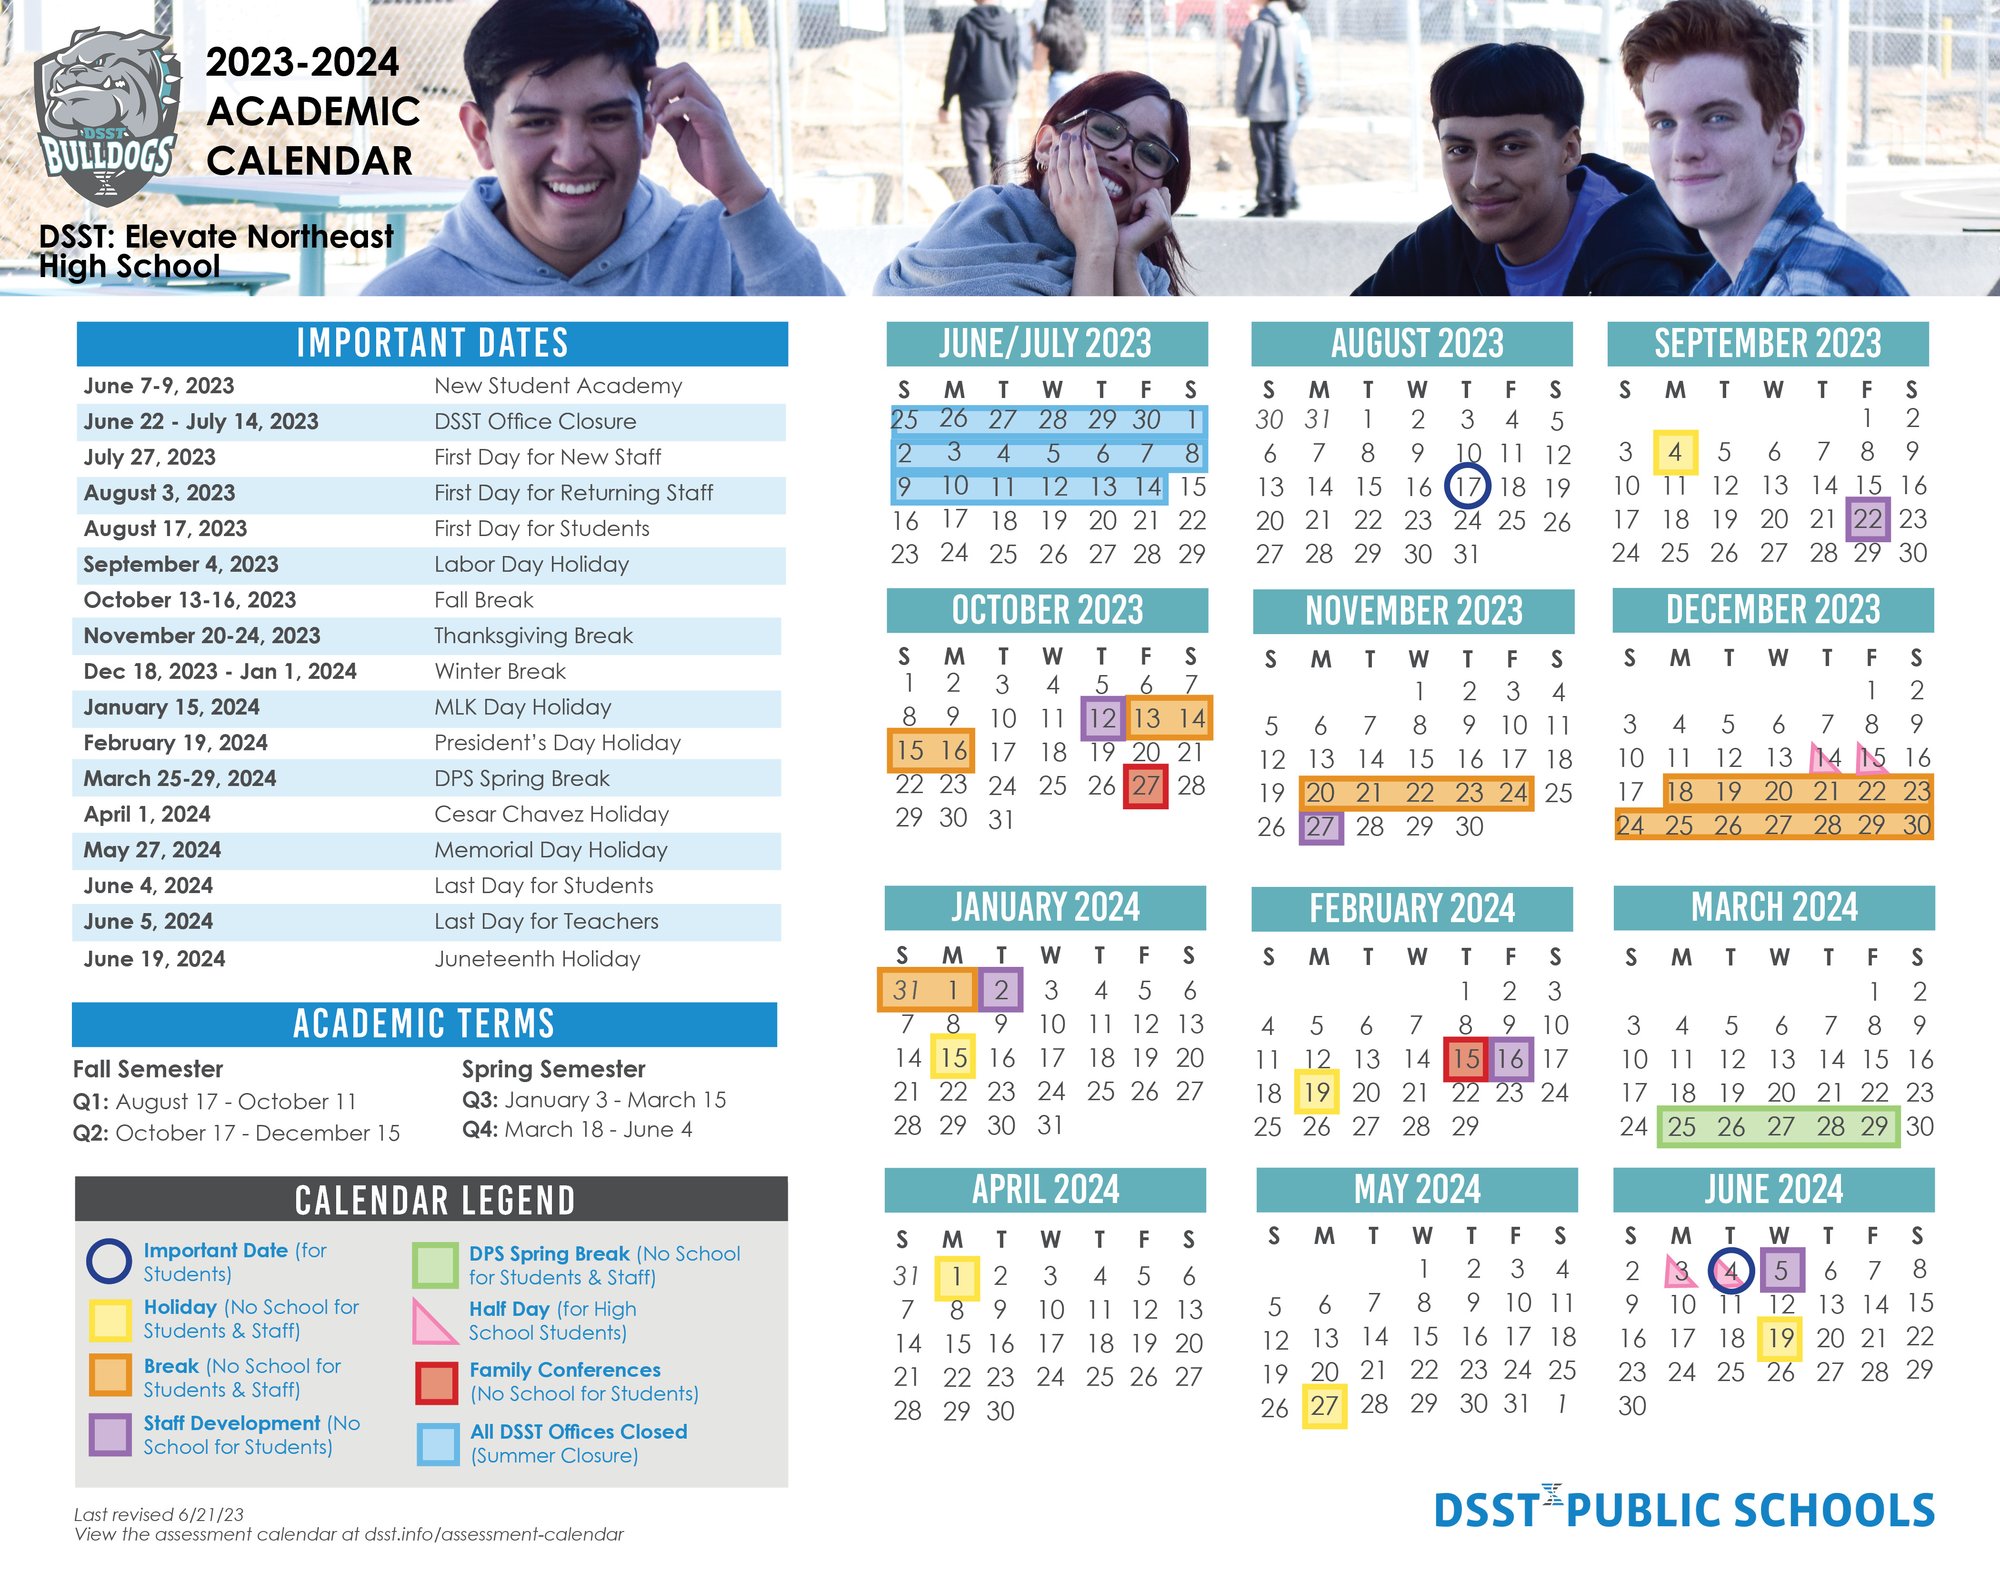 Elevate HS Calendar 23-24 English and Spanish 6.21.23